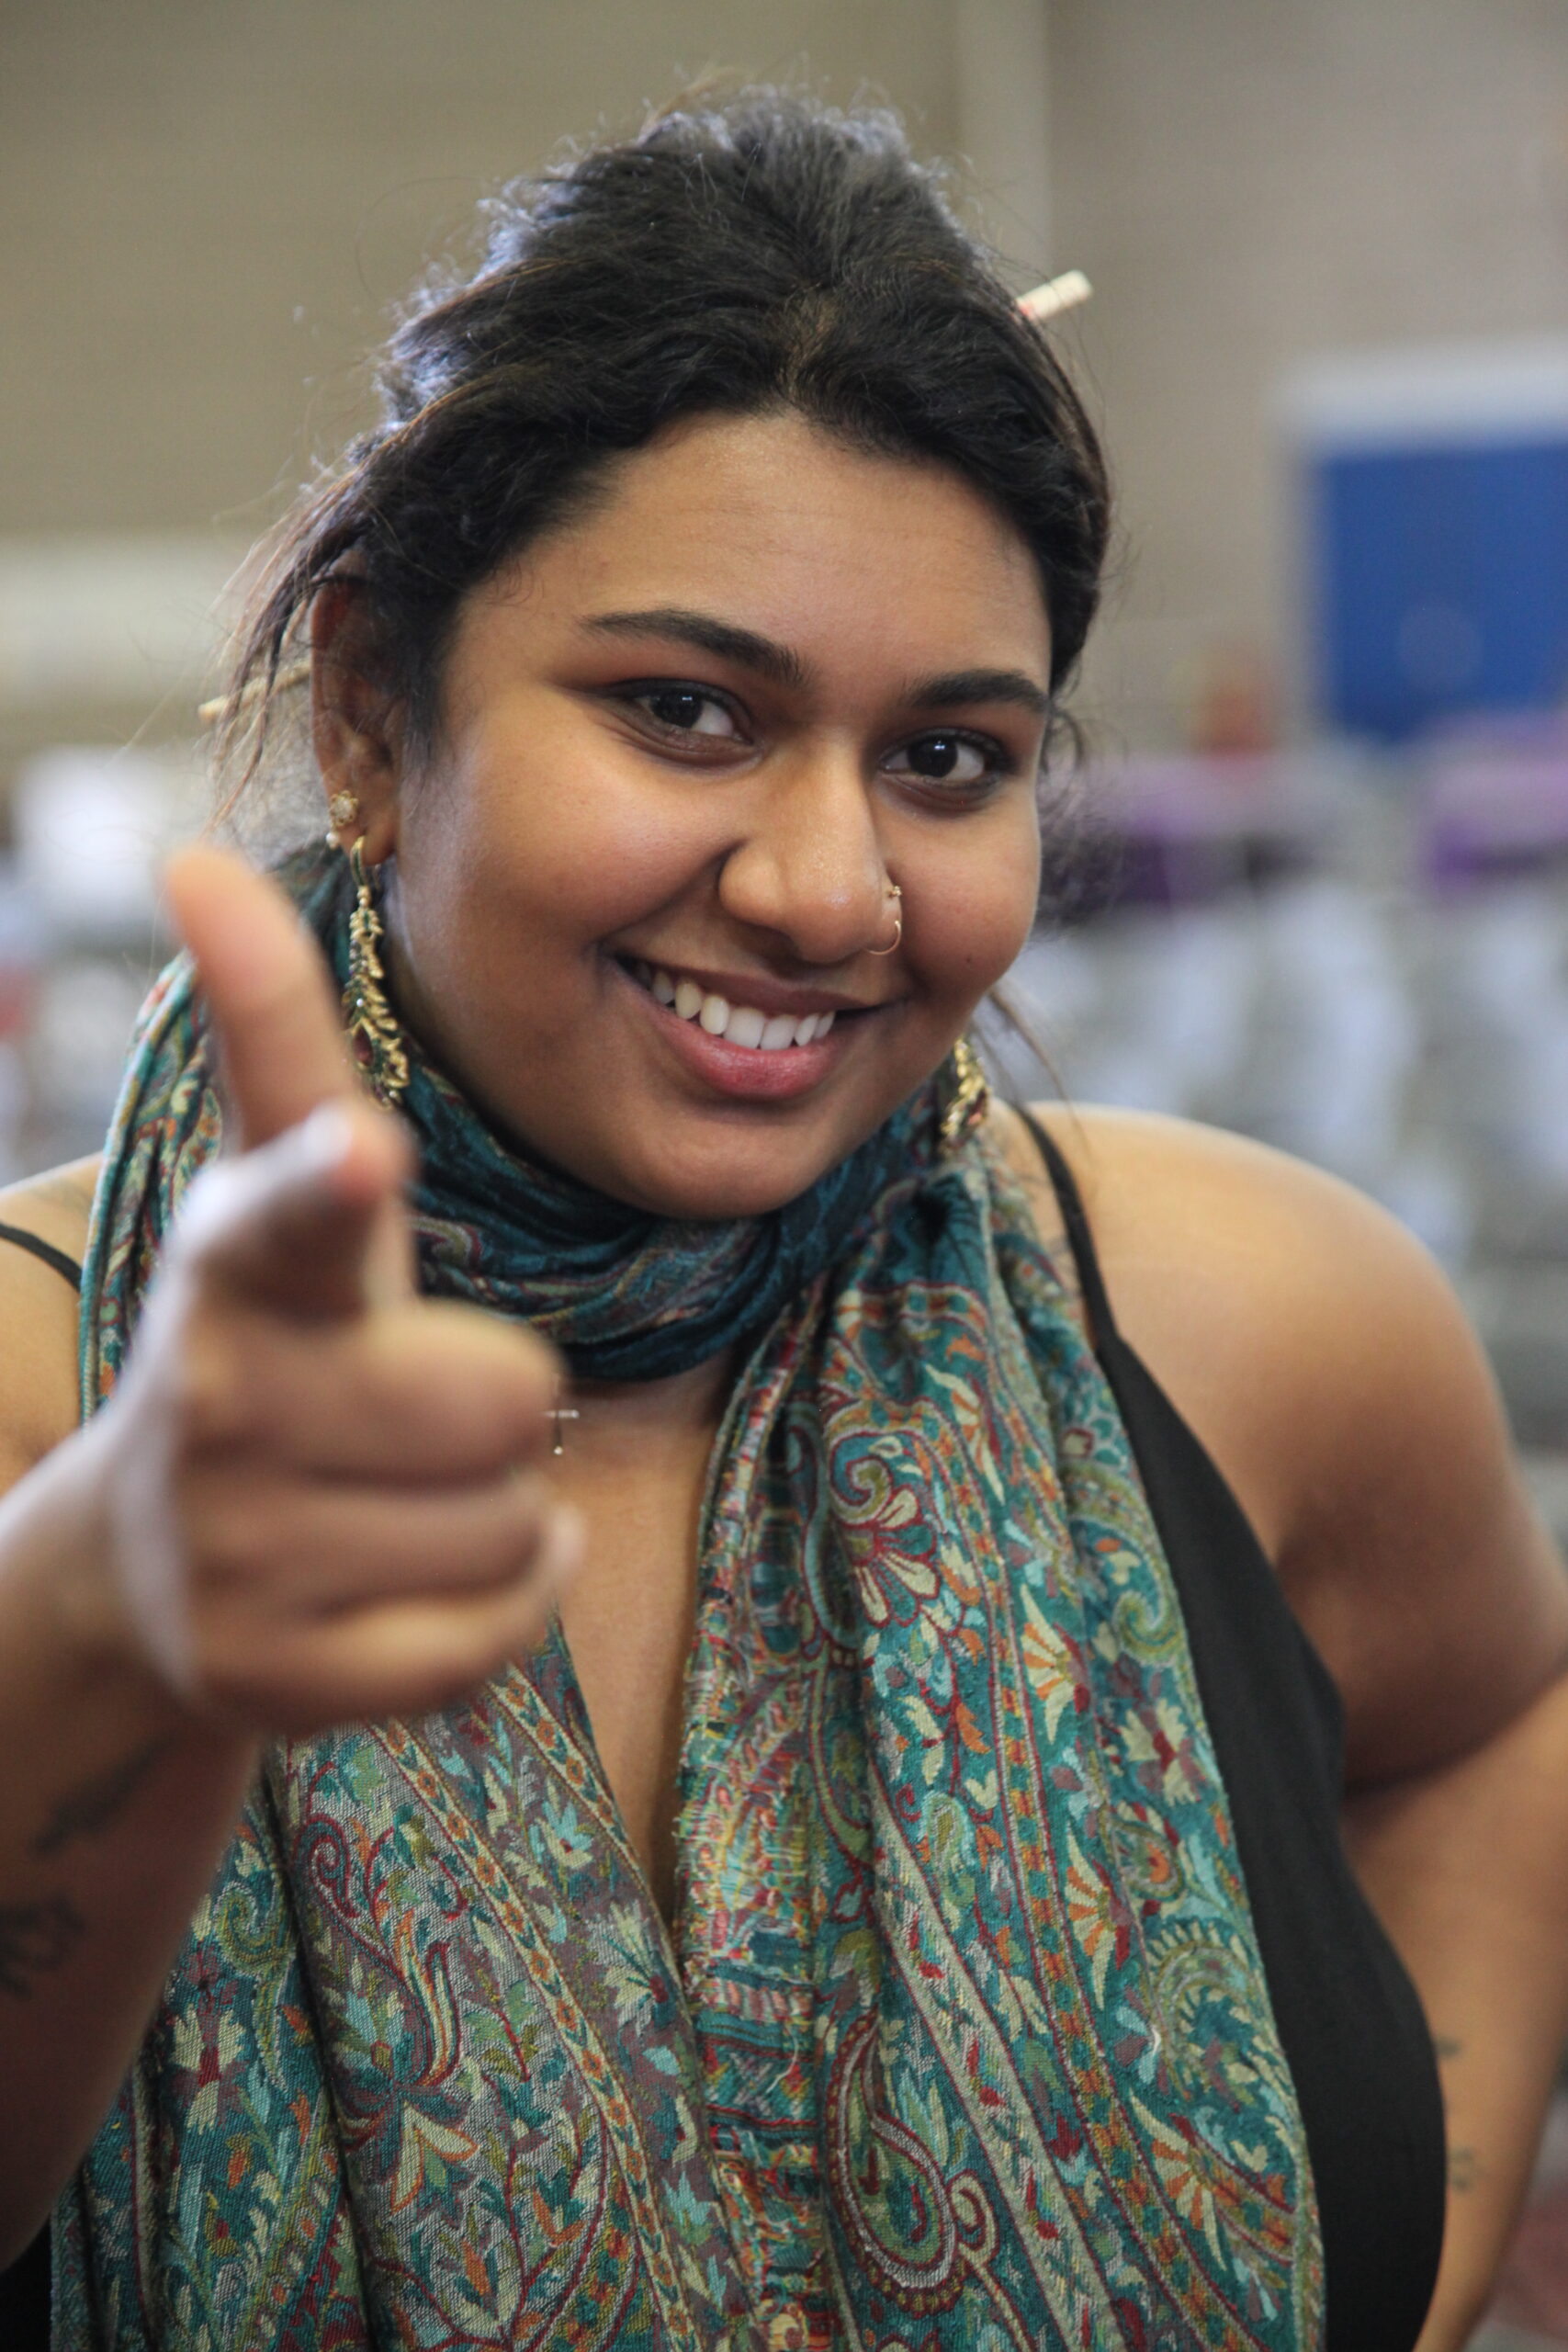 Person smiling with straight black hair in a bun, a nose piercing and turquoise patterned scarf. They are holding a finger gun sign up in a light-hearted matter.